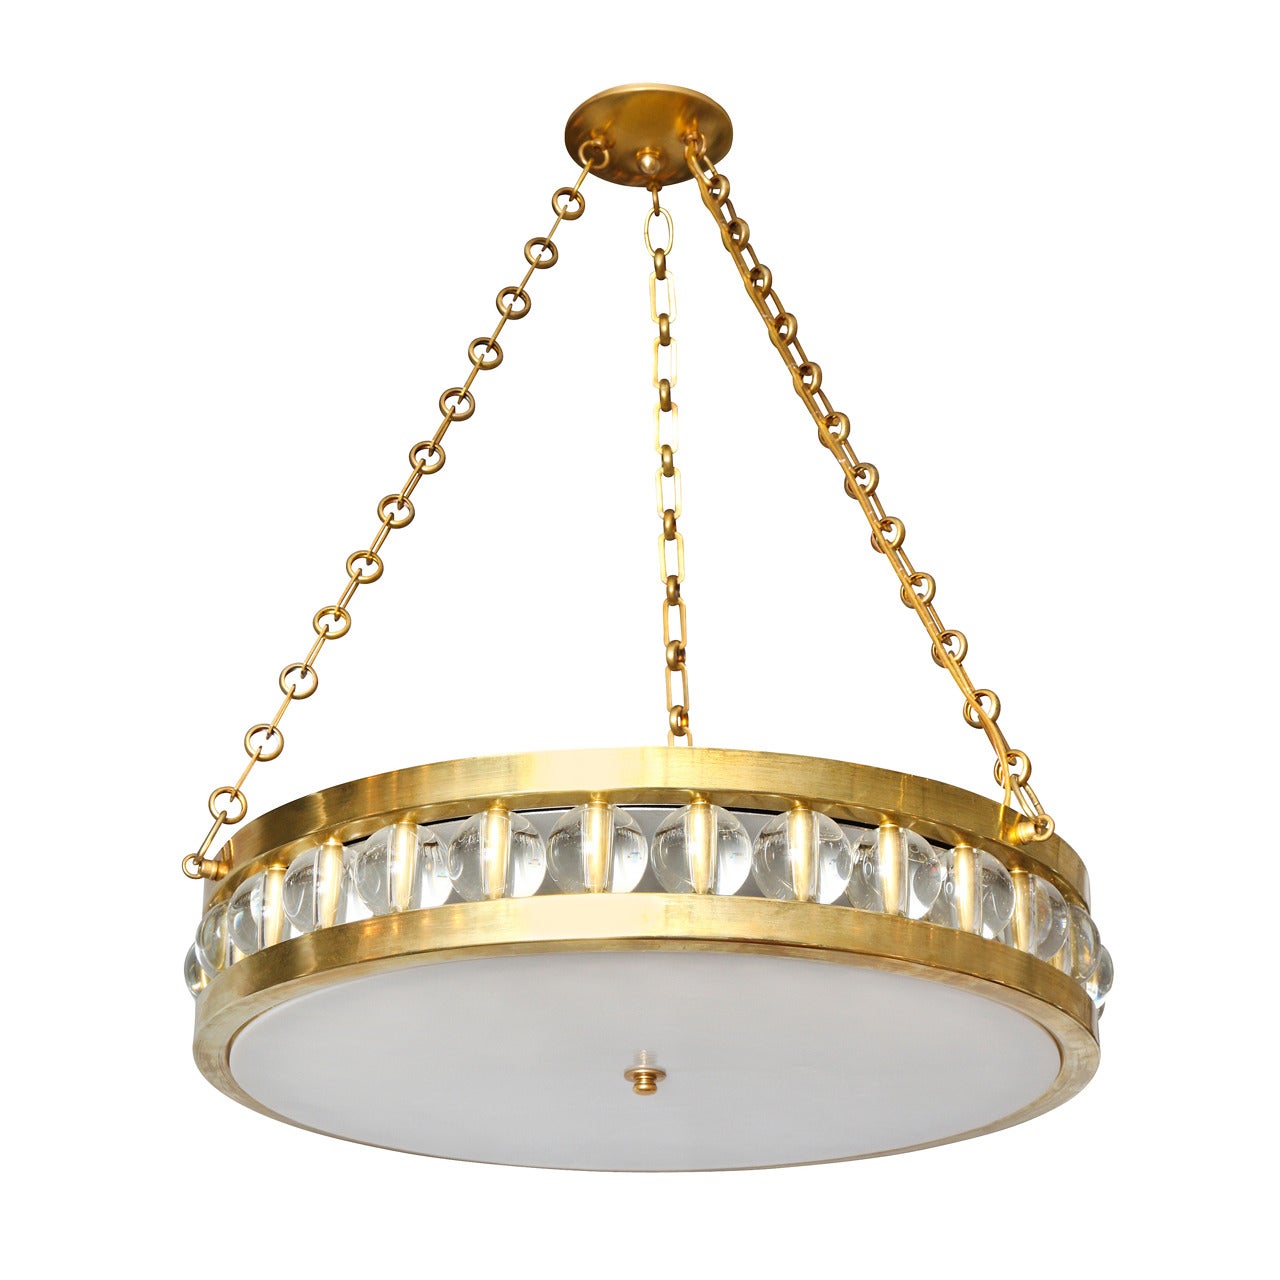 A 24" Tambour Pendant Fixture with Chain